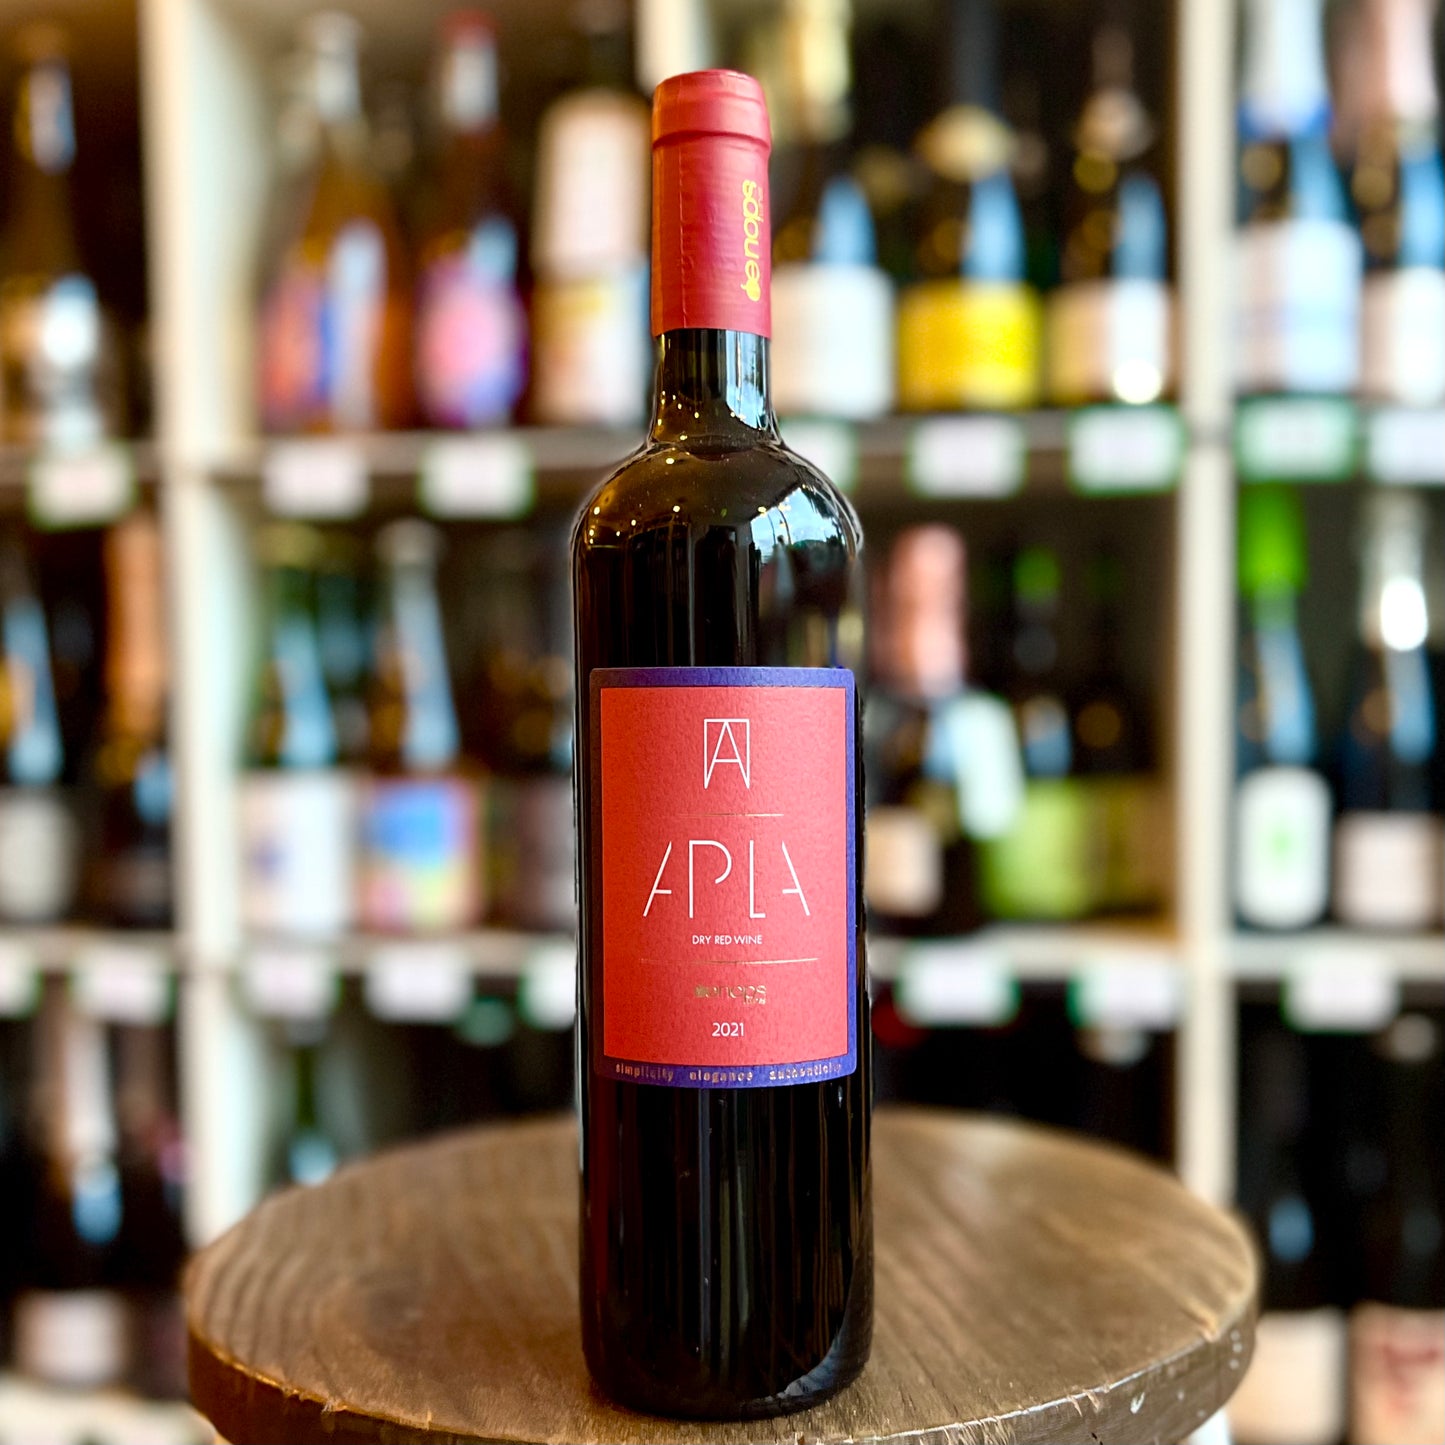 Oenops Wines, Apla Red, Drama, Greece